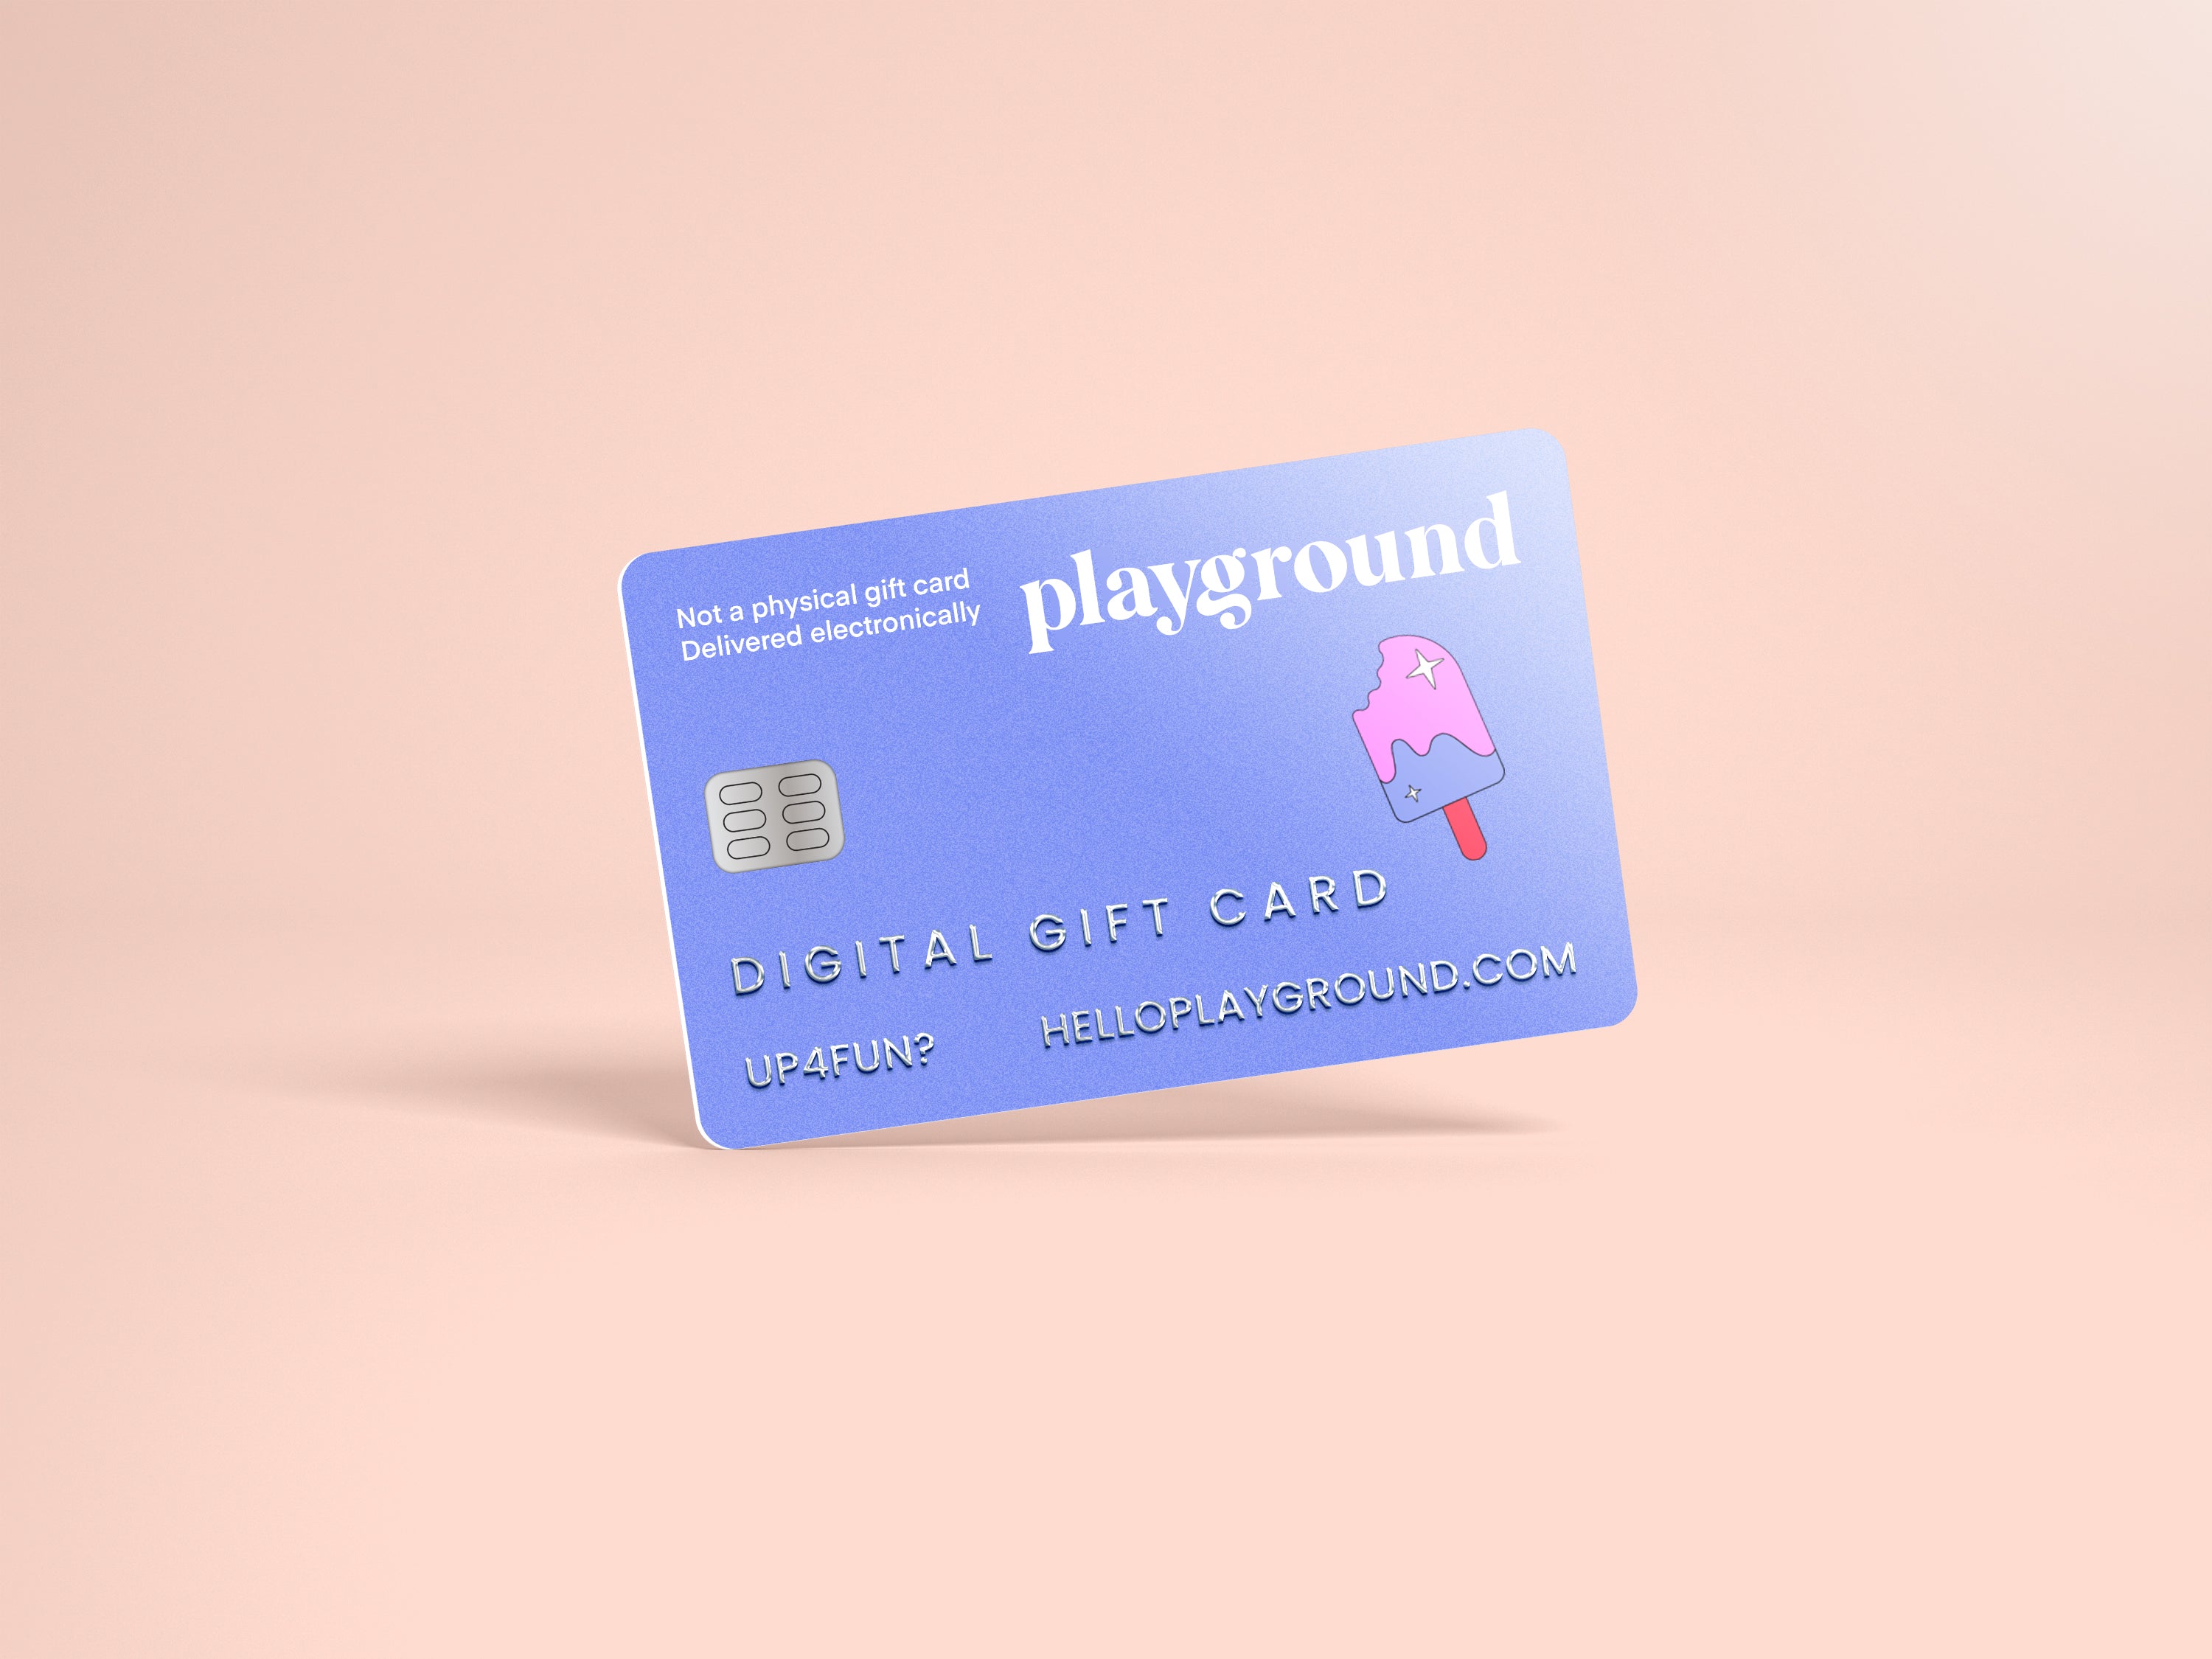 EGIFT CARDS – Melon Playground Official Store